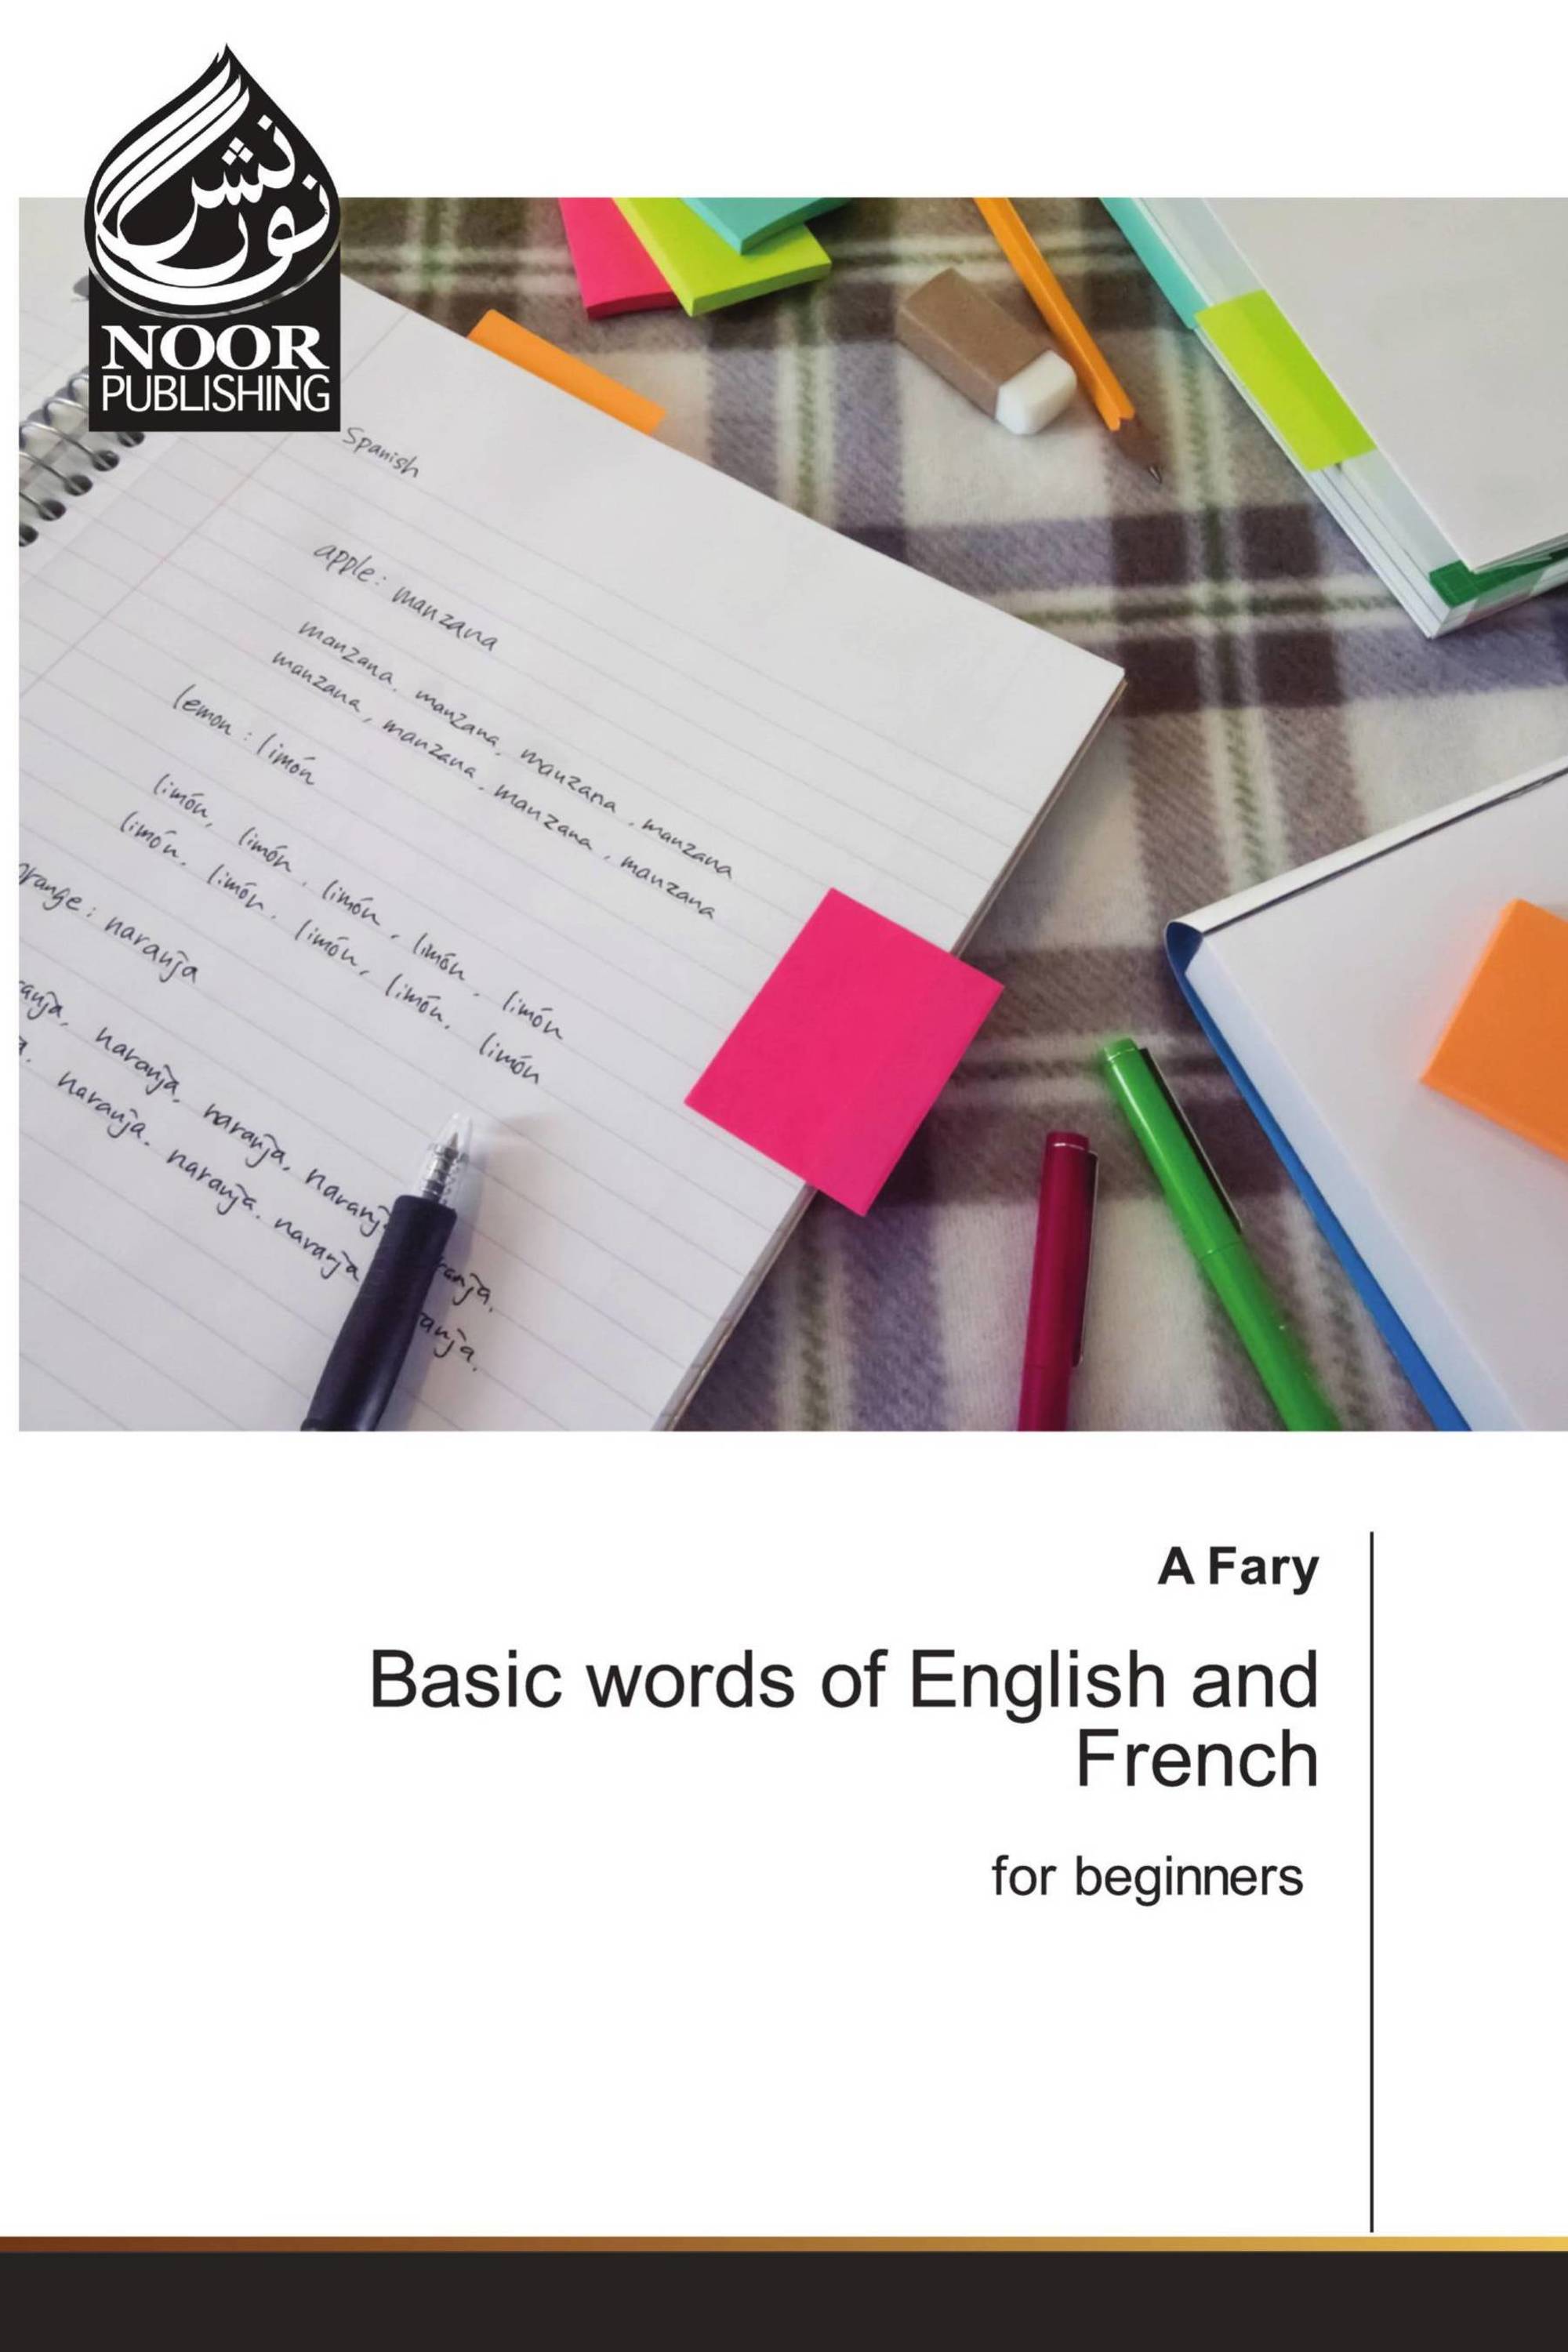 Basic words of English and French